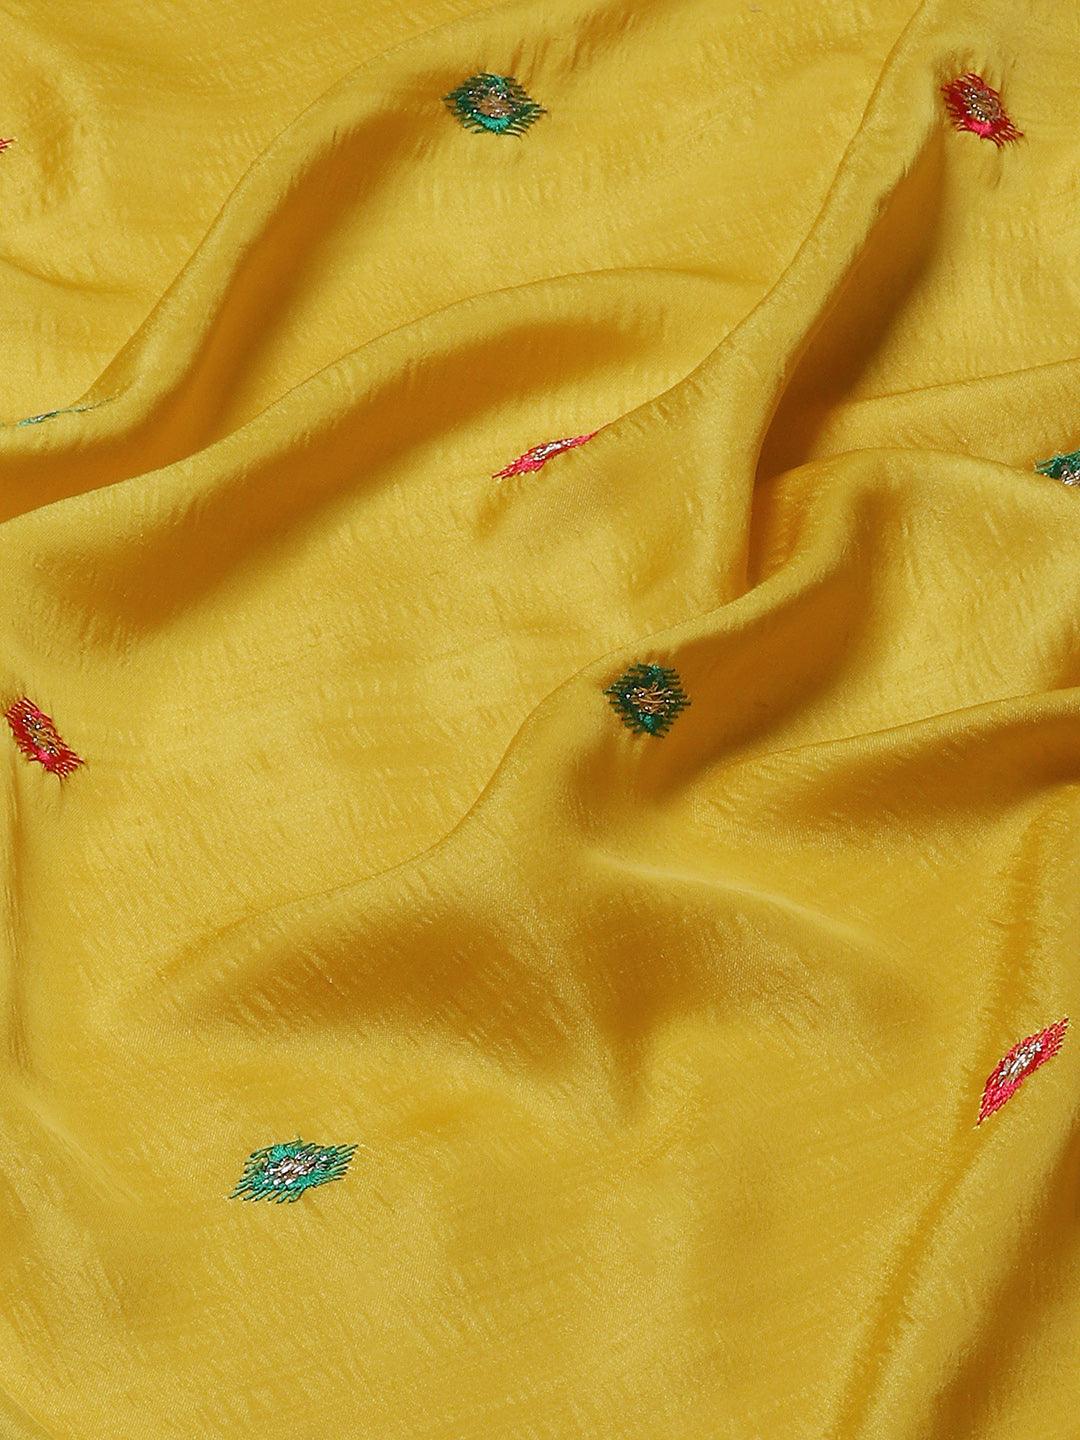 Gorgeous Yellow Embroidered Work Silk Saree With Blouse - Indiakreations